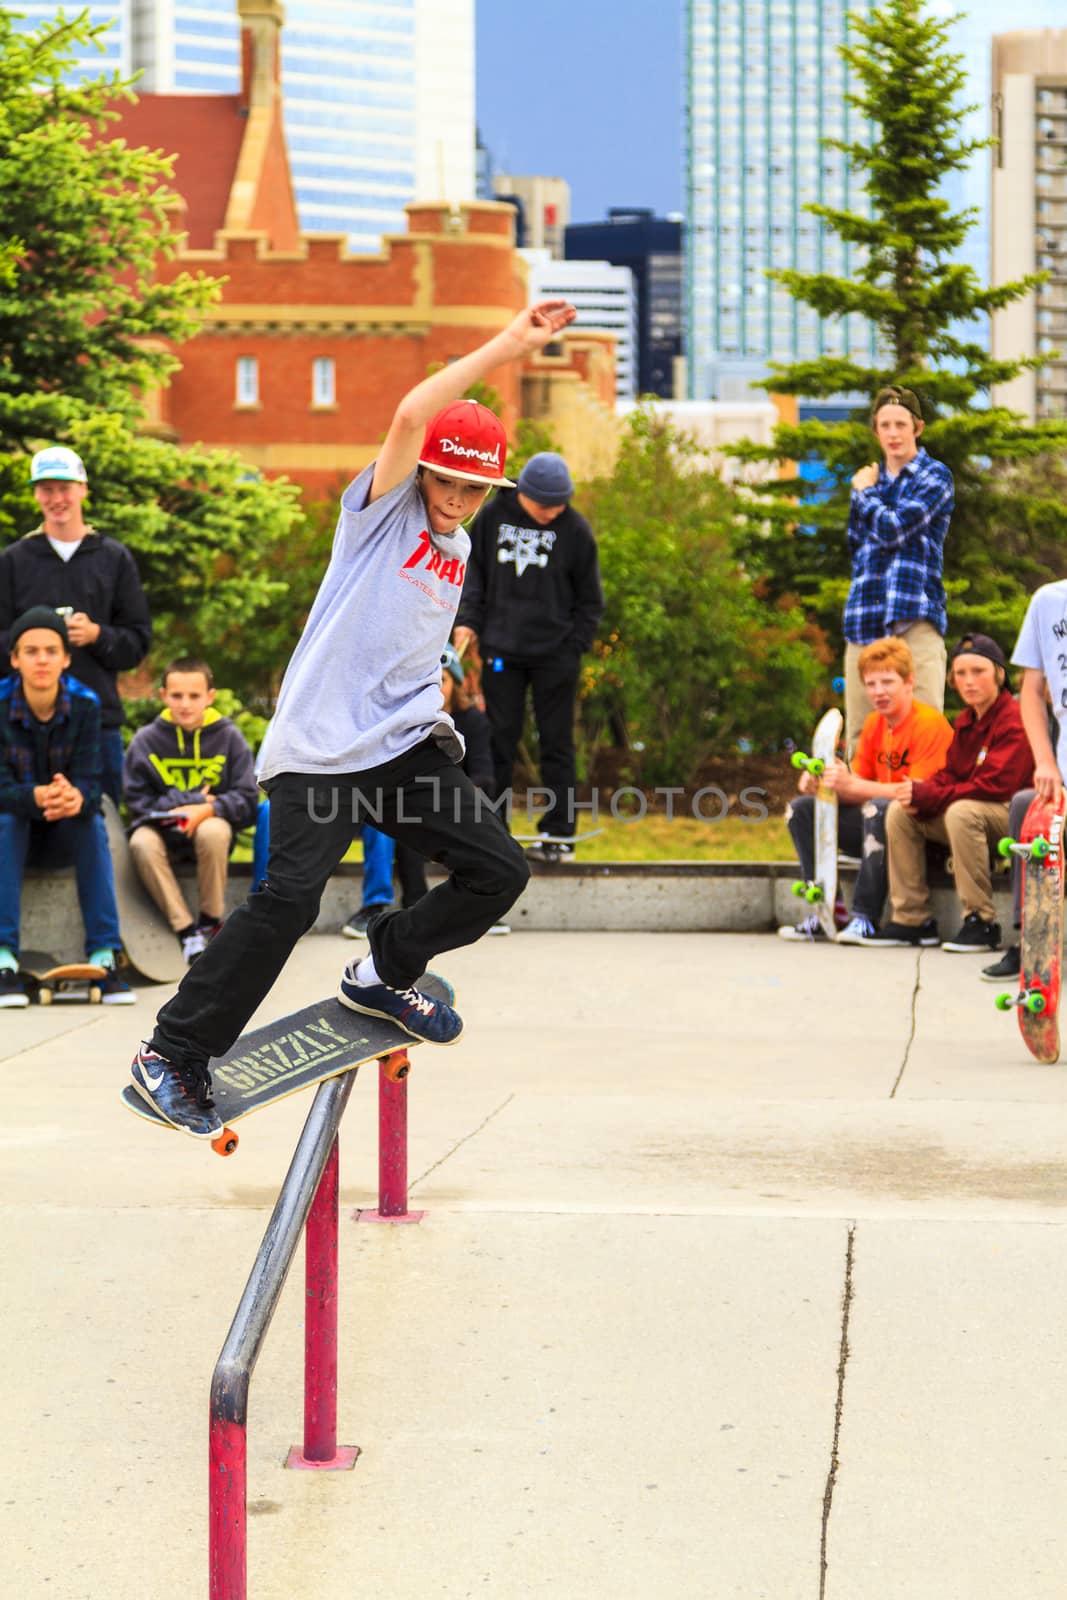 CALGARY, CANADA - JUN 21, 2015: Athletes have a friendly skateboard competition in Calgary. California law requires anyone under the age of 18 to wear a helmet while riding a skateboard.